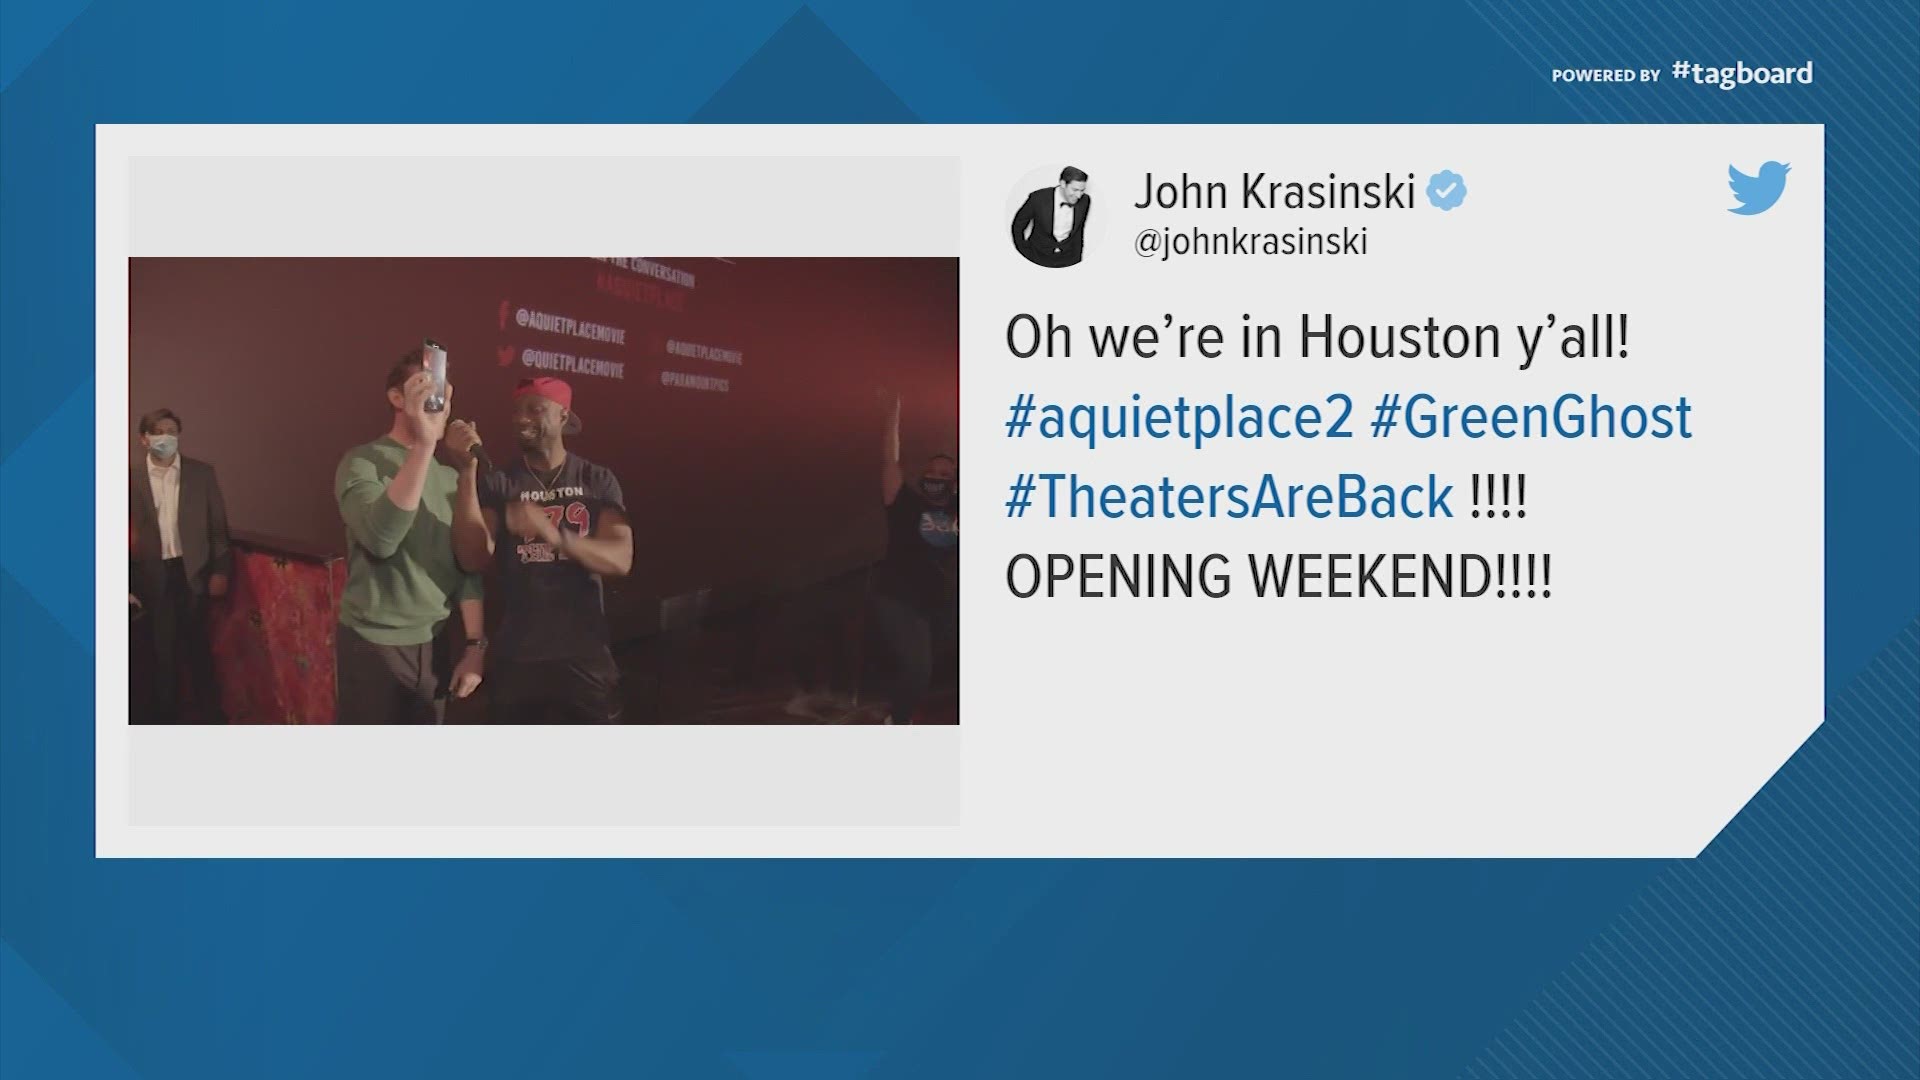 Actor and director John Krasinski surprised movie-goers at the opening screening of "A Quiet Place 2" at one of the Regal Theatres in Houston.